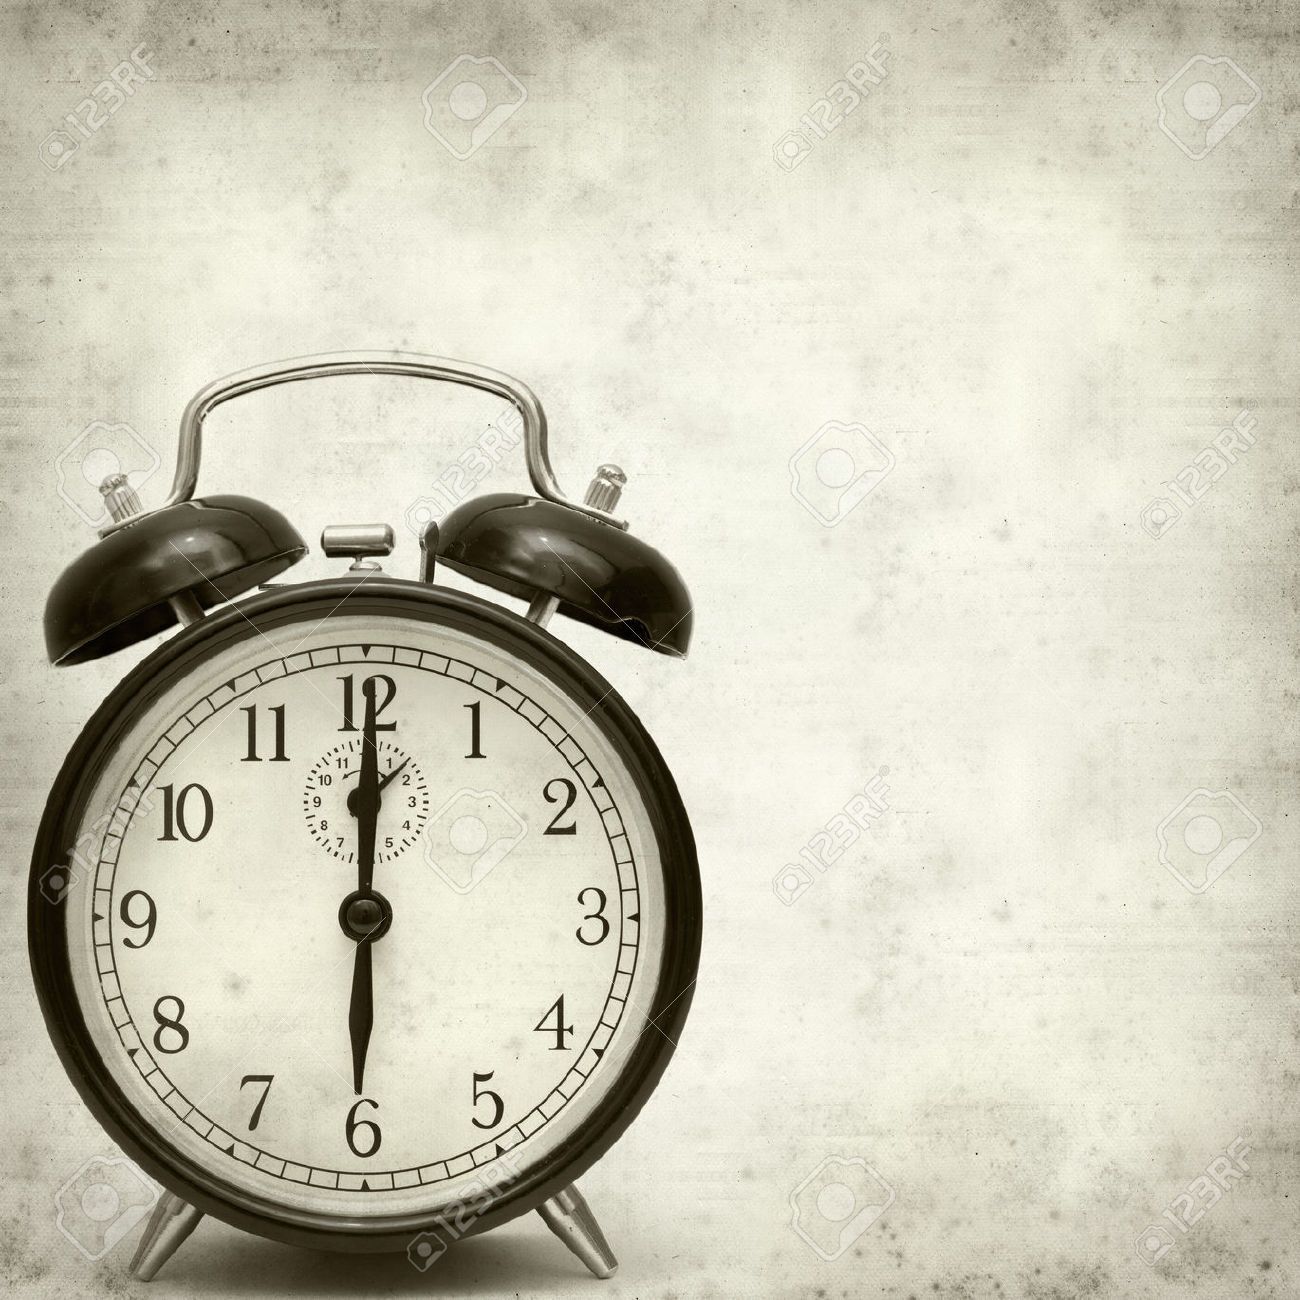 Nice HD Wallpaper's Collection (39) of Vintage Alarm Clock